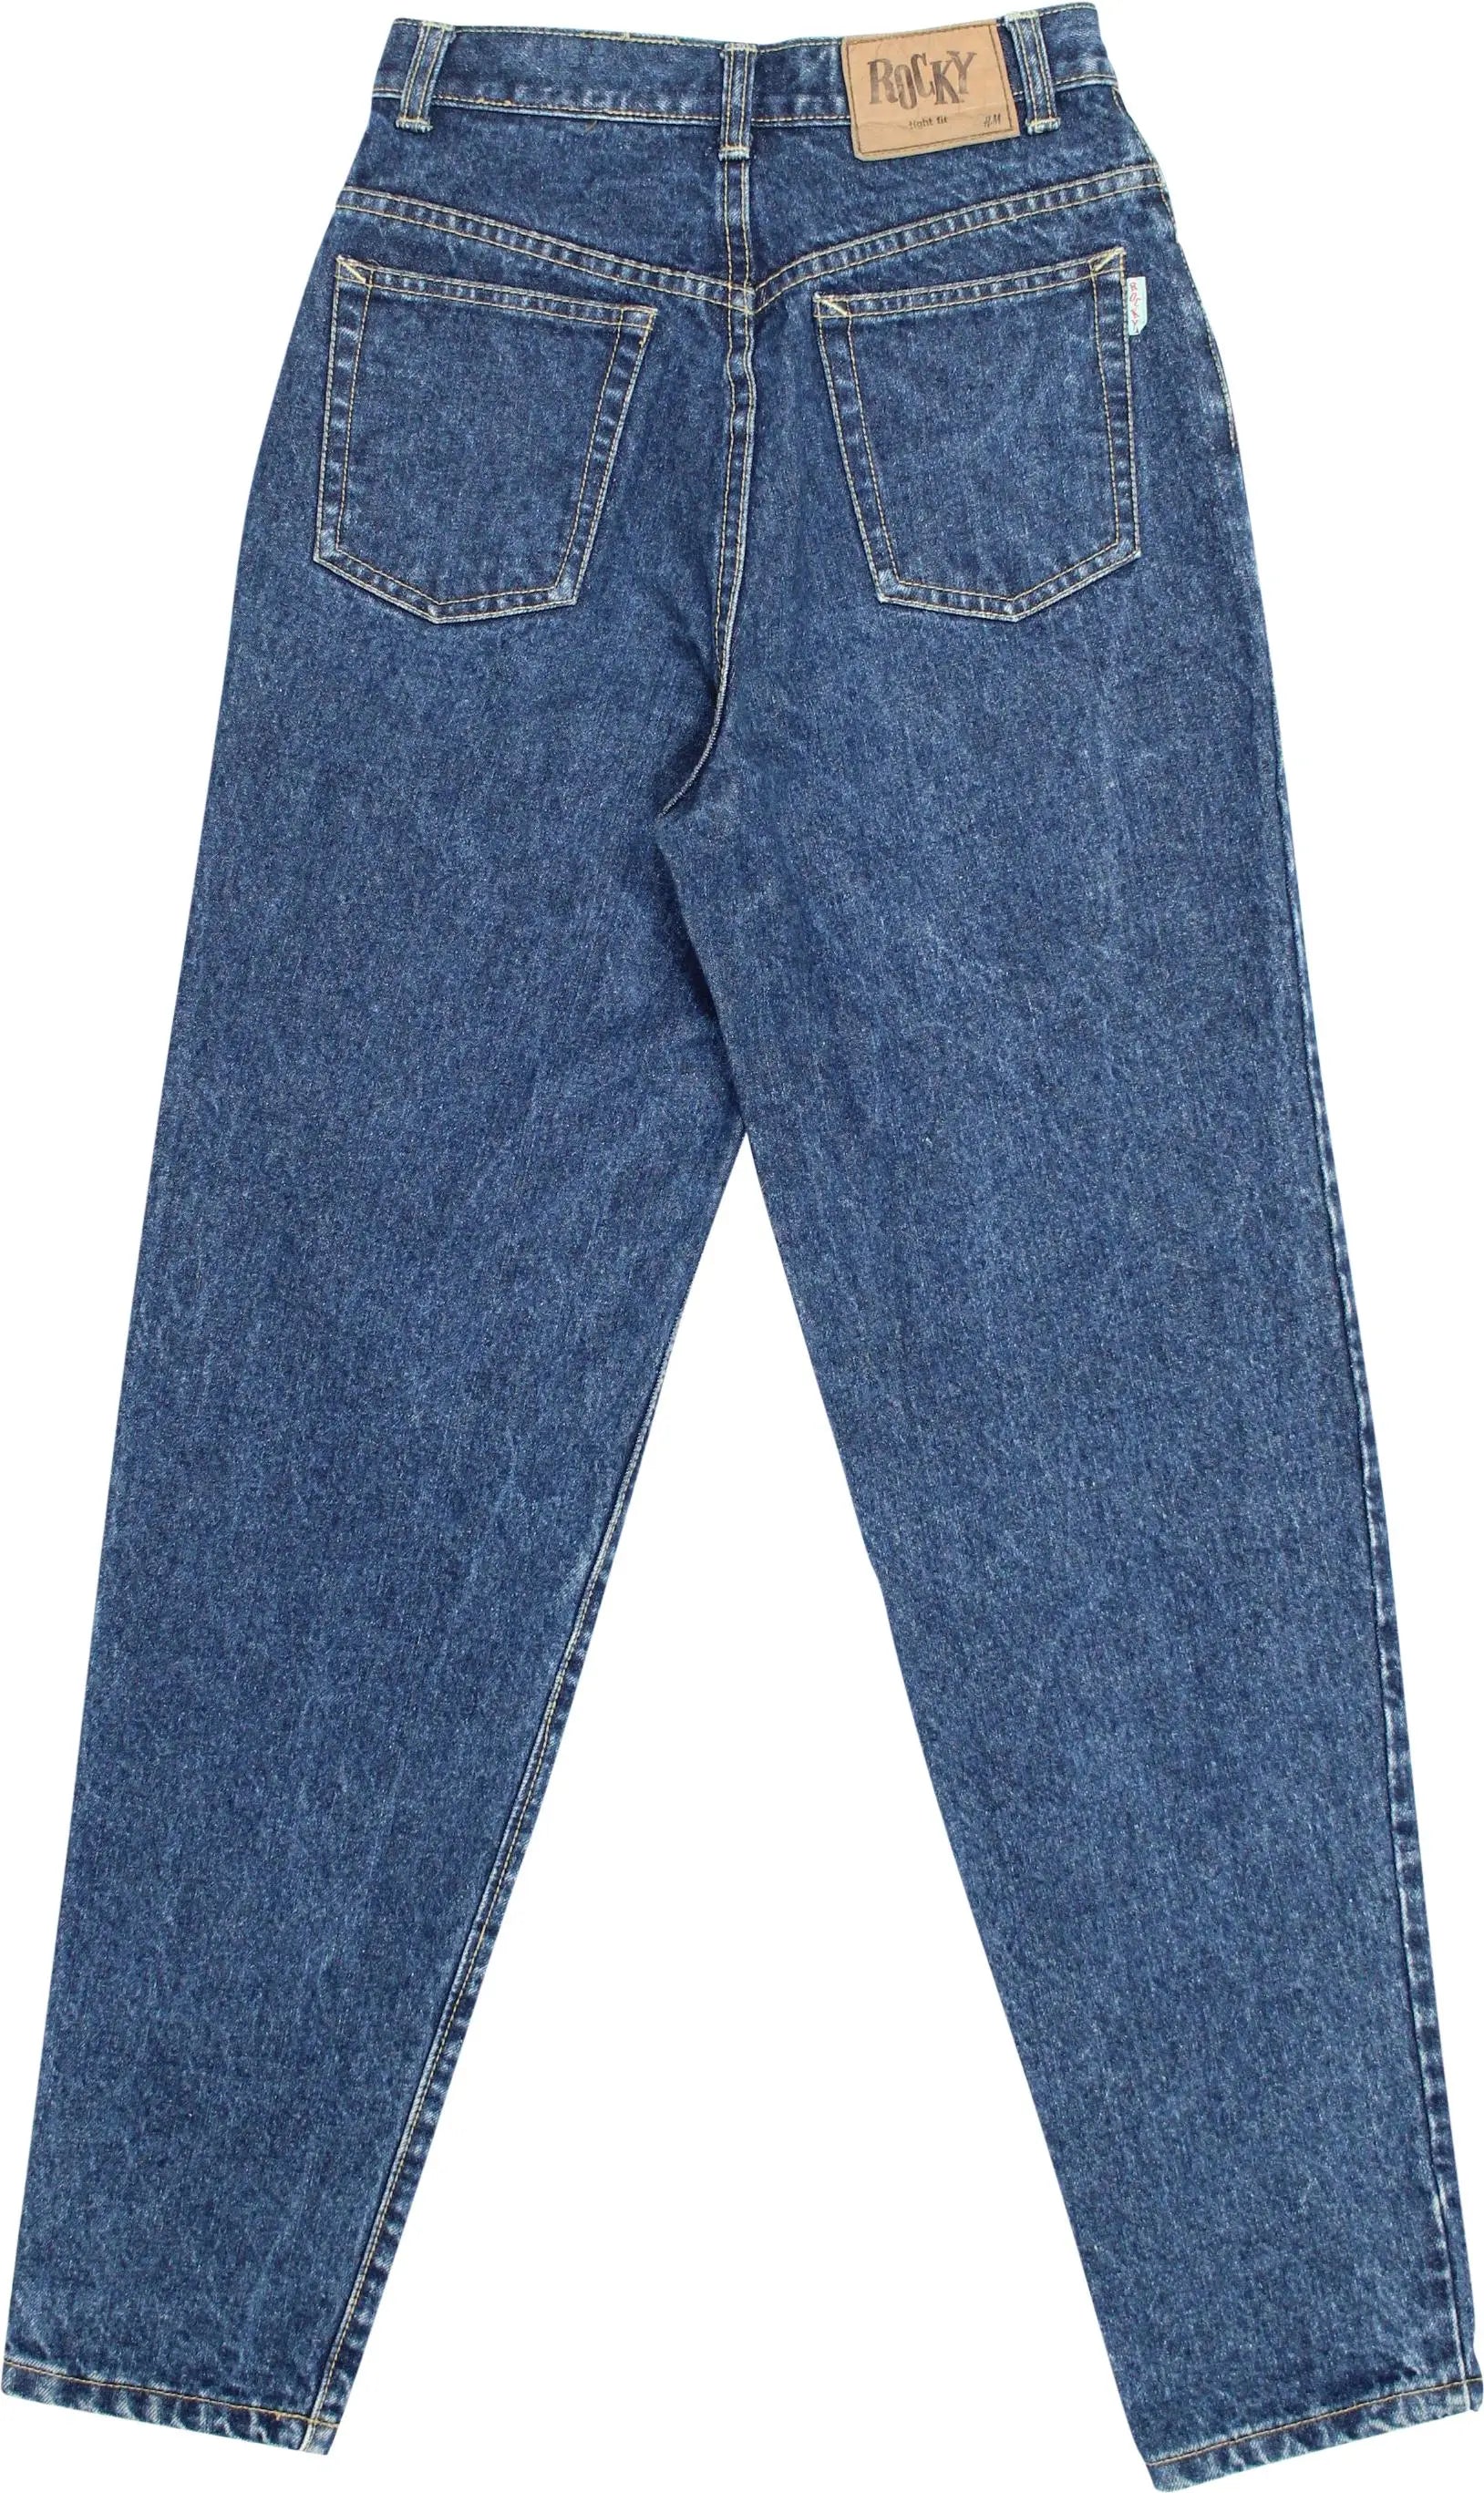 H&M - 00s High Waisted Jeans- ThriftTale.com - Vintage and second handclothing